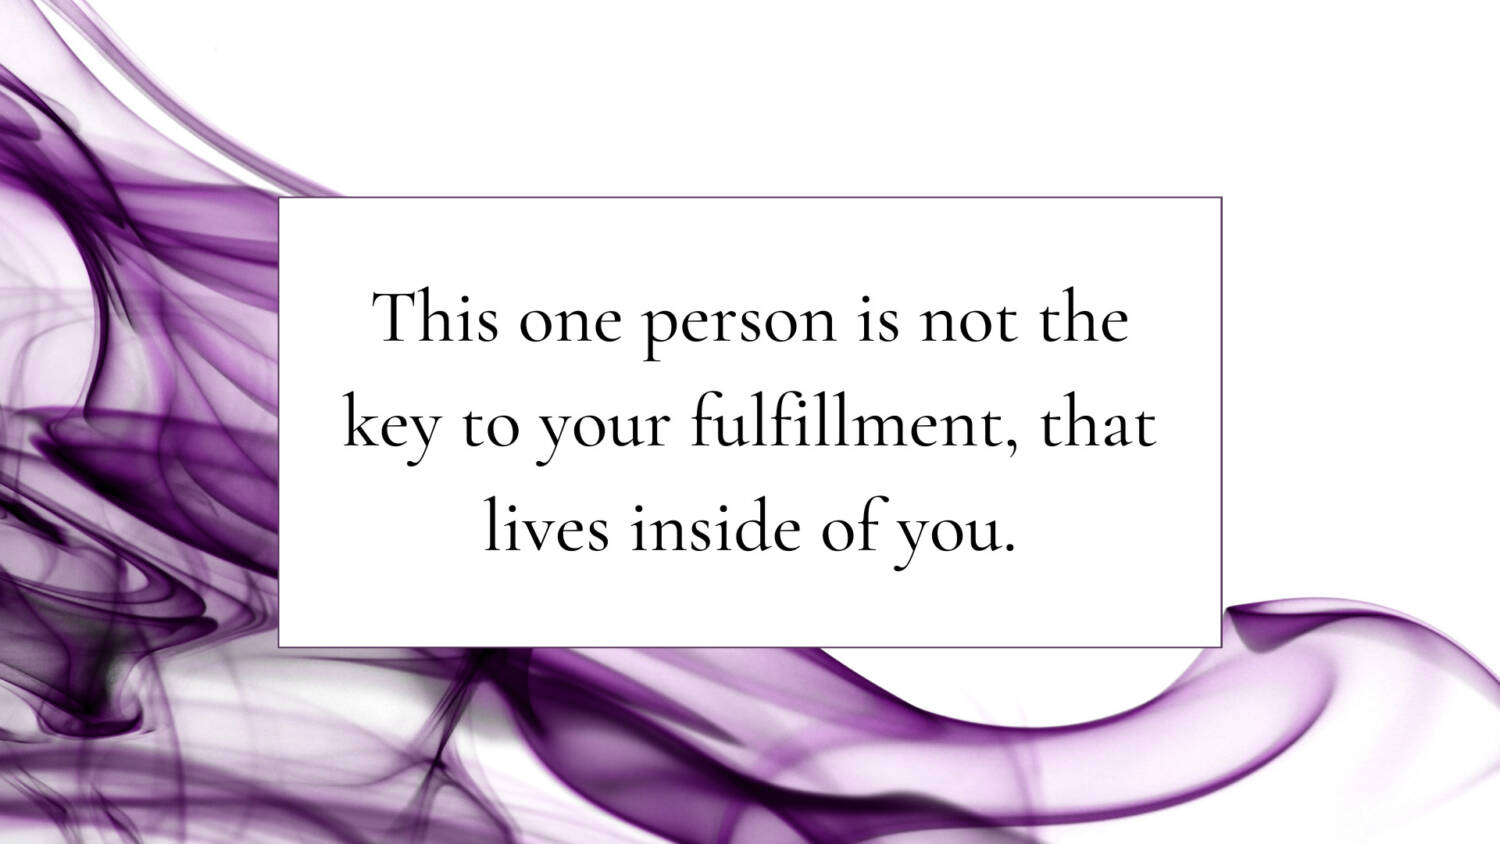 This one person is not the key to your fulfillment, that lives inside of you.